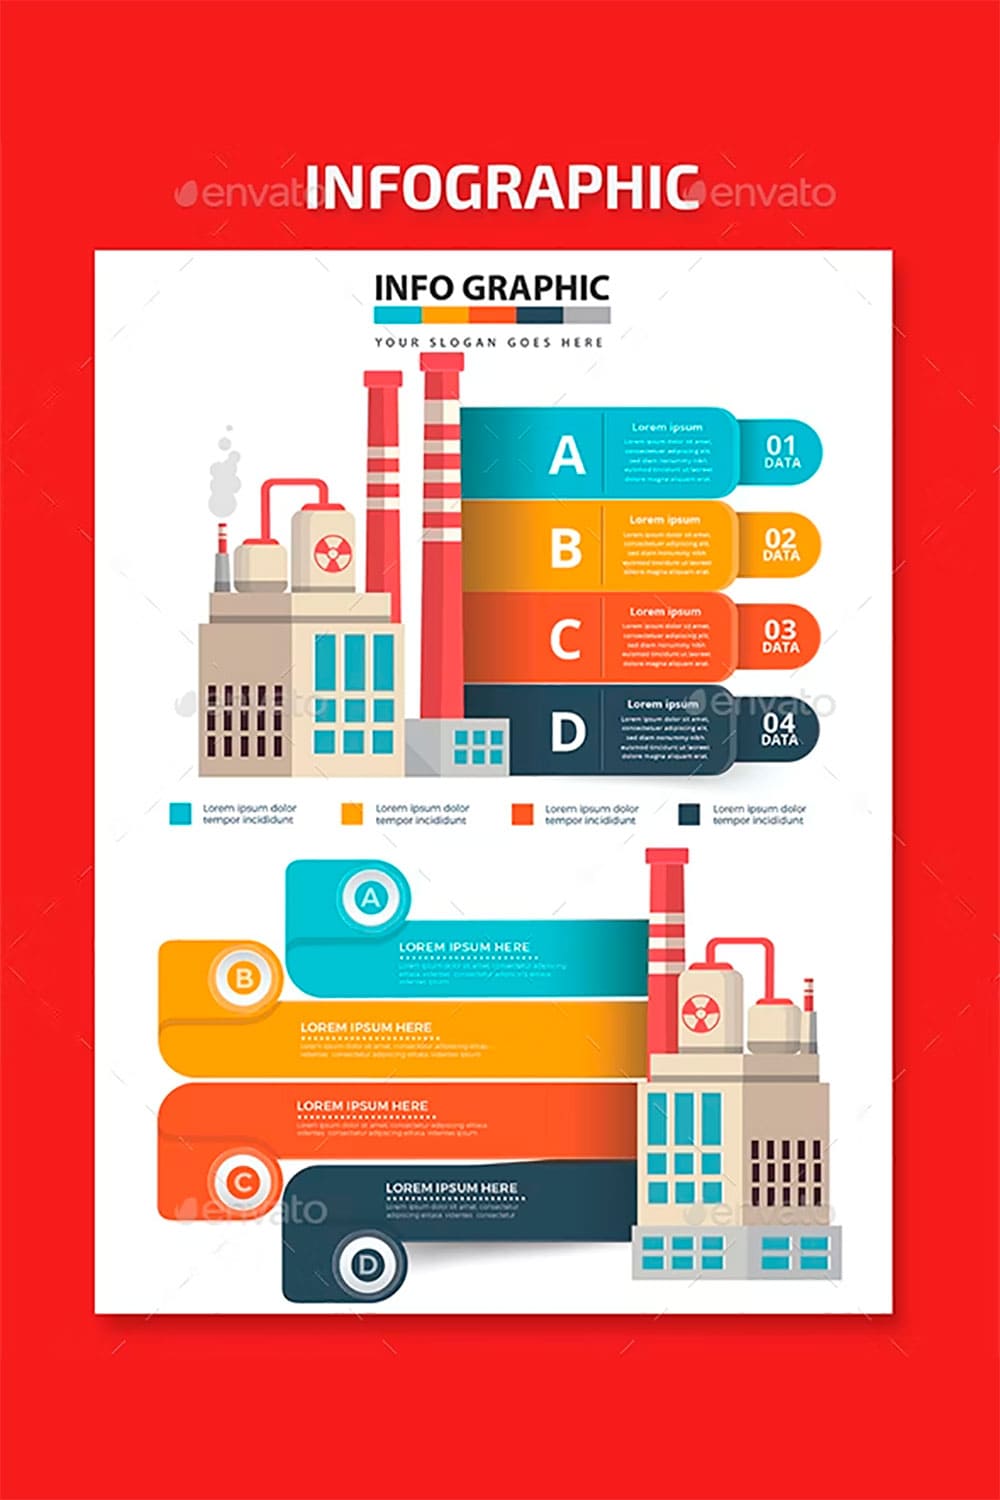 Industry infographic design on red, picture for pinterest.